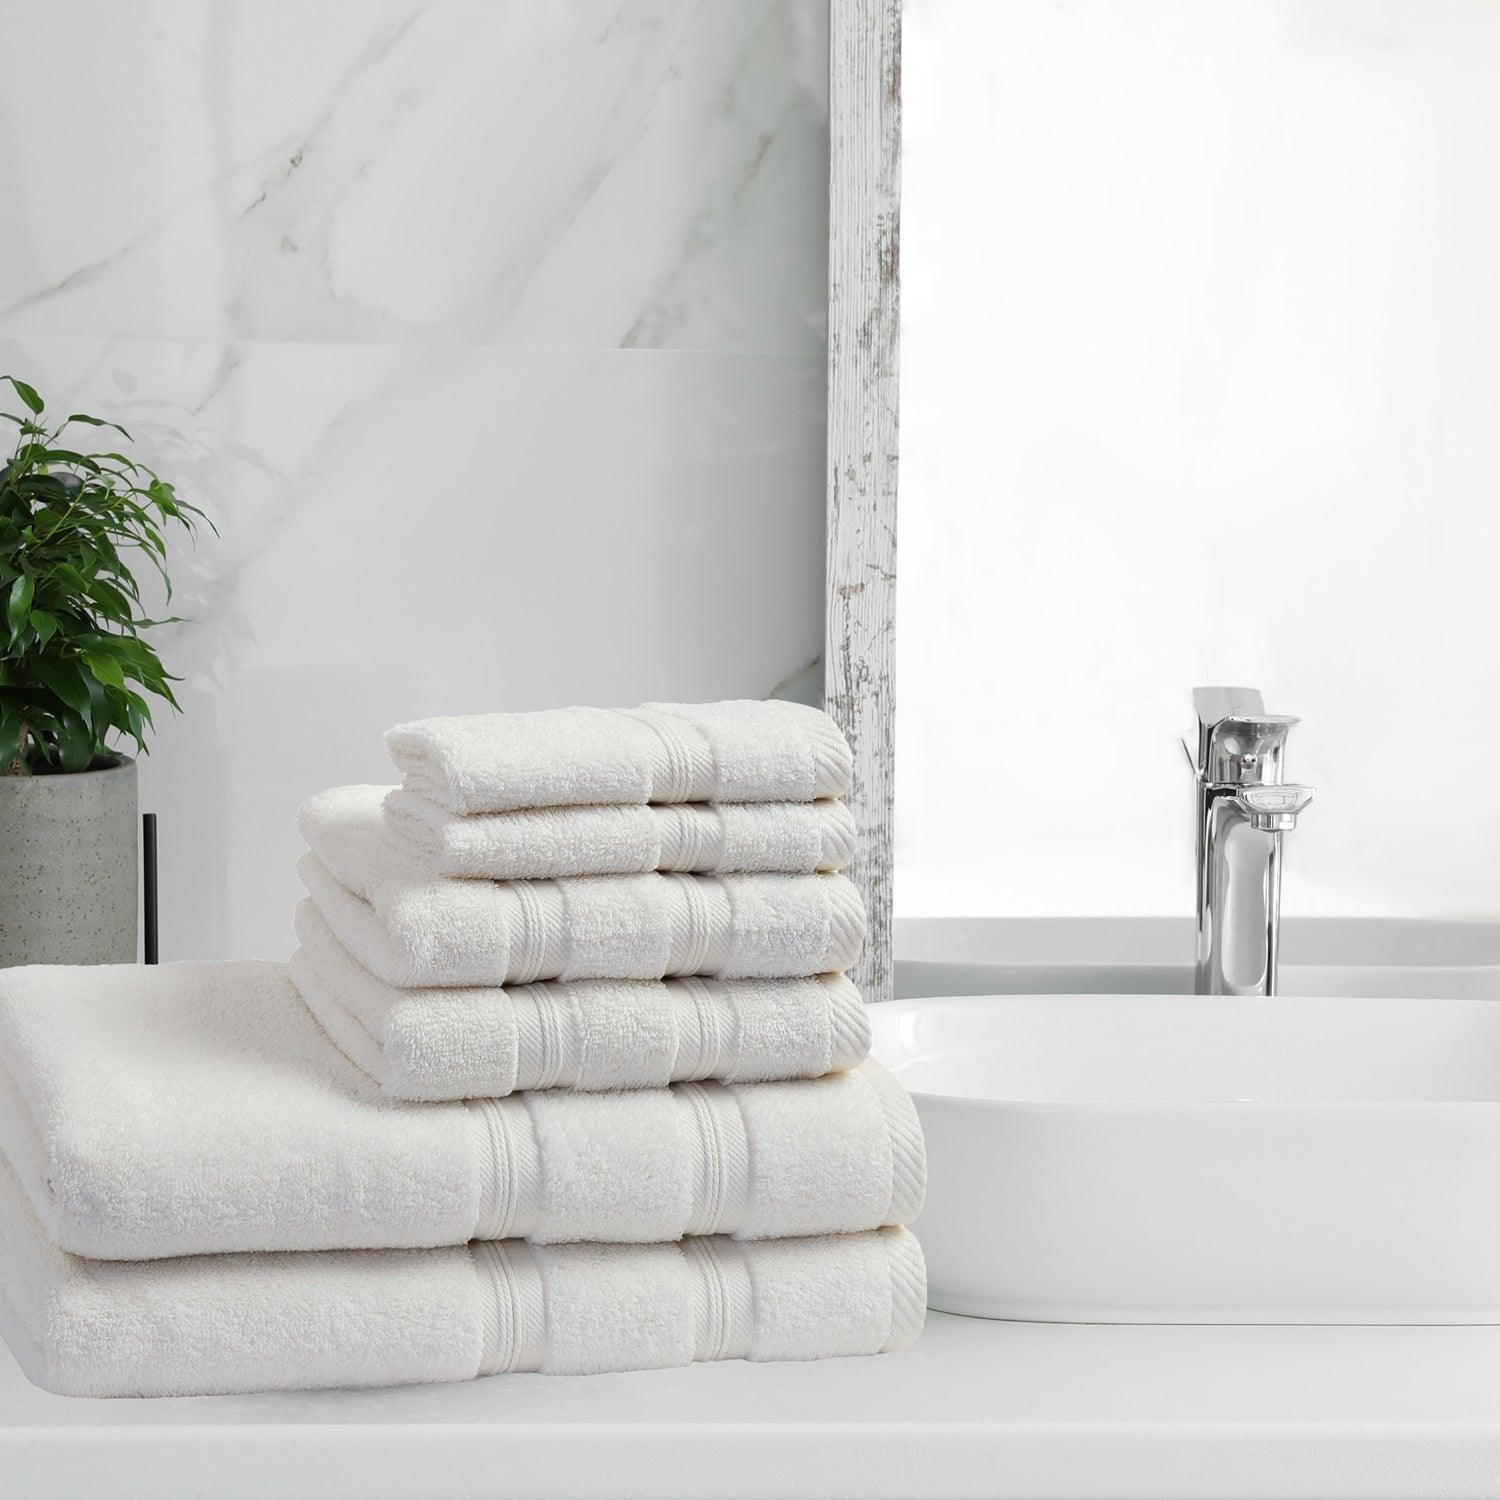 100 Percent Cotton Towel Set, Zero Twist, Soft and Absorbent 6 Piece Set  With 2 Bath Towels, 2 Hand Towels and 2 Washcloths (White) By Lavish Home